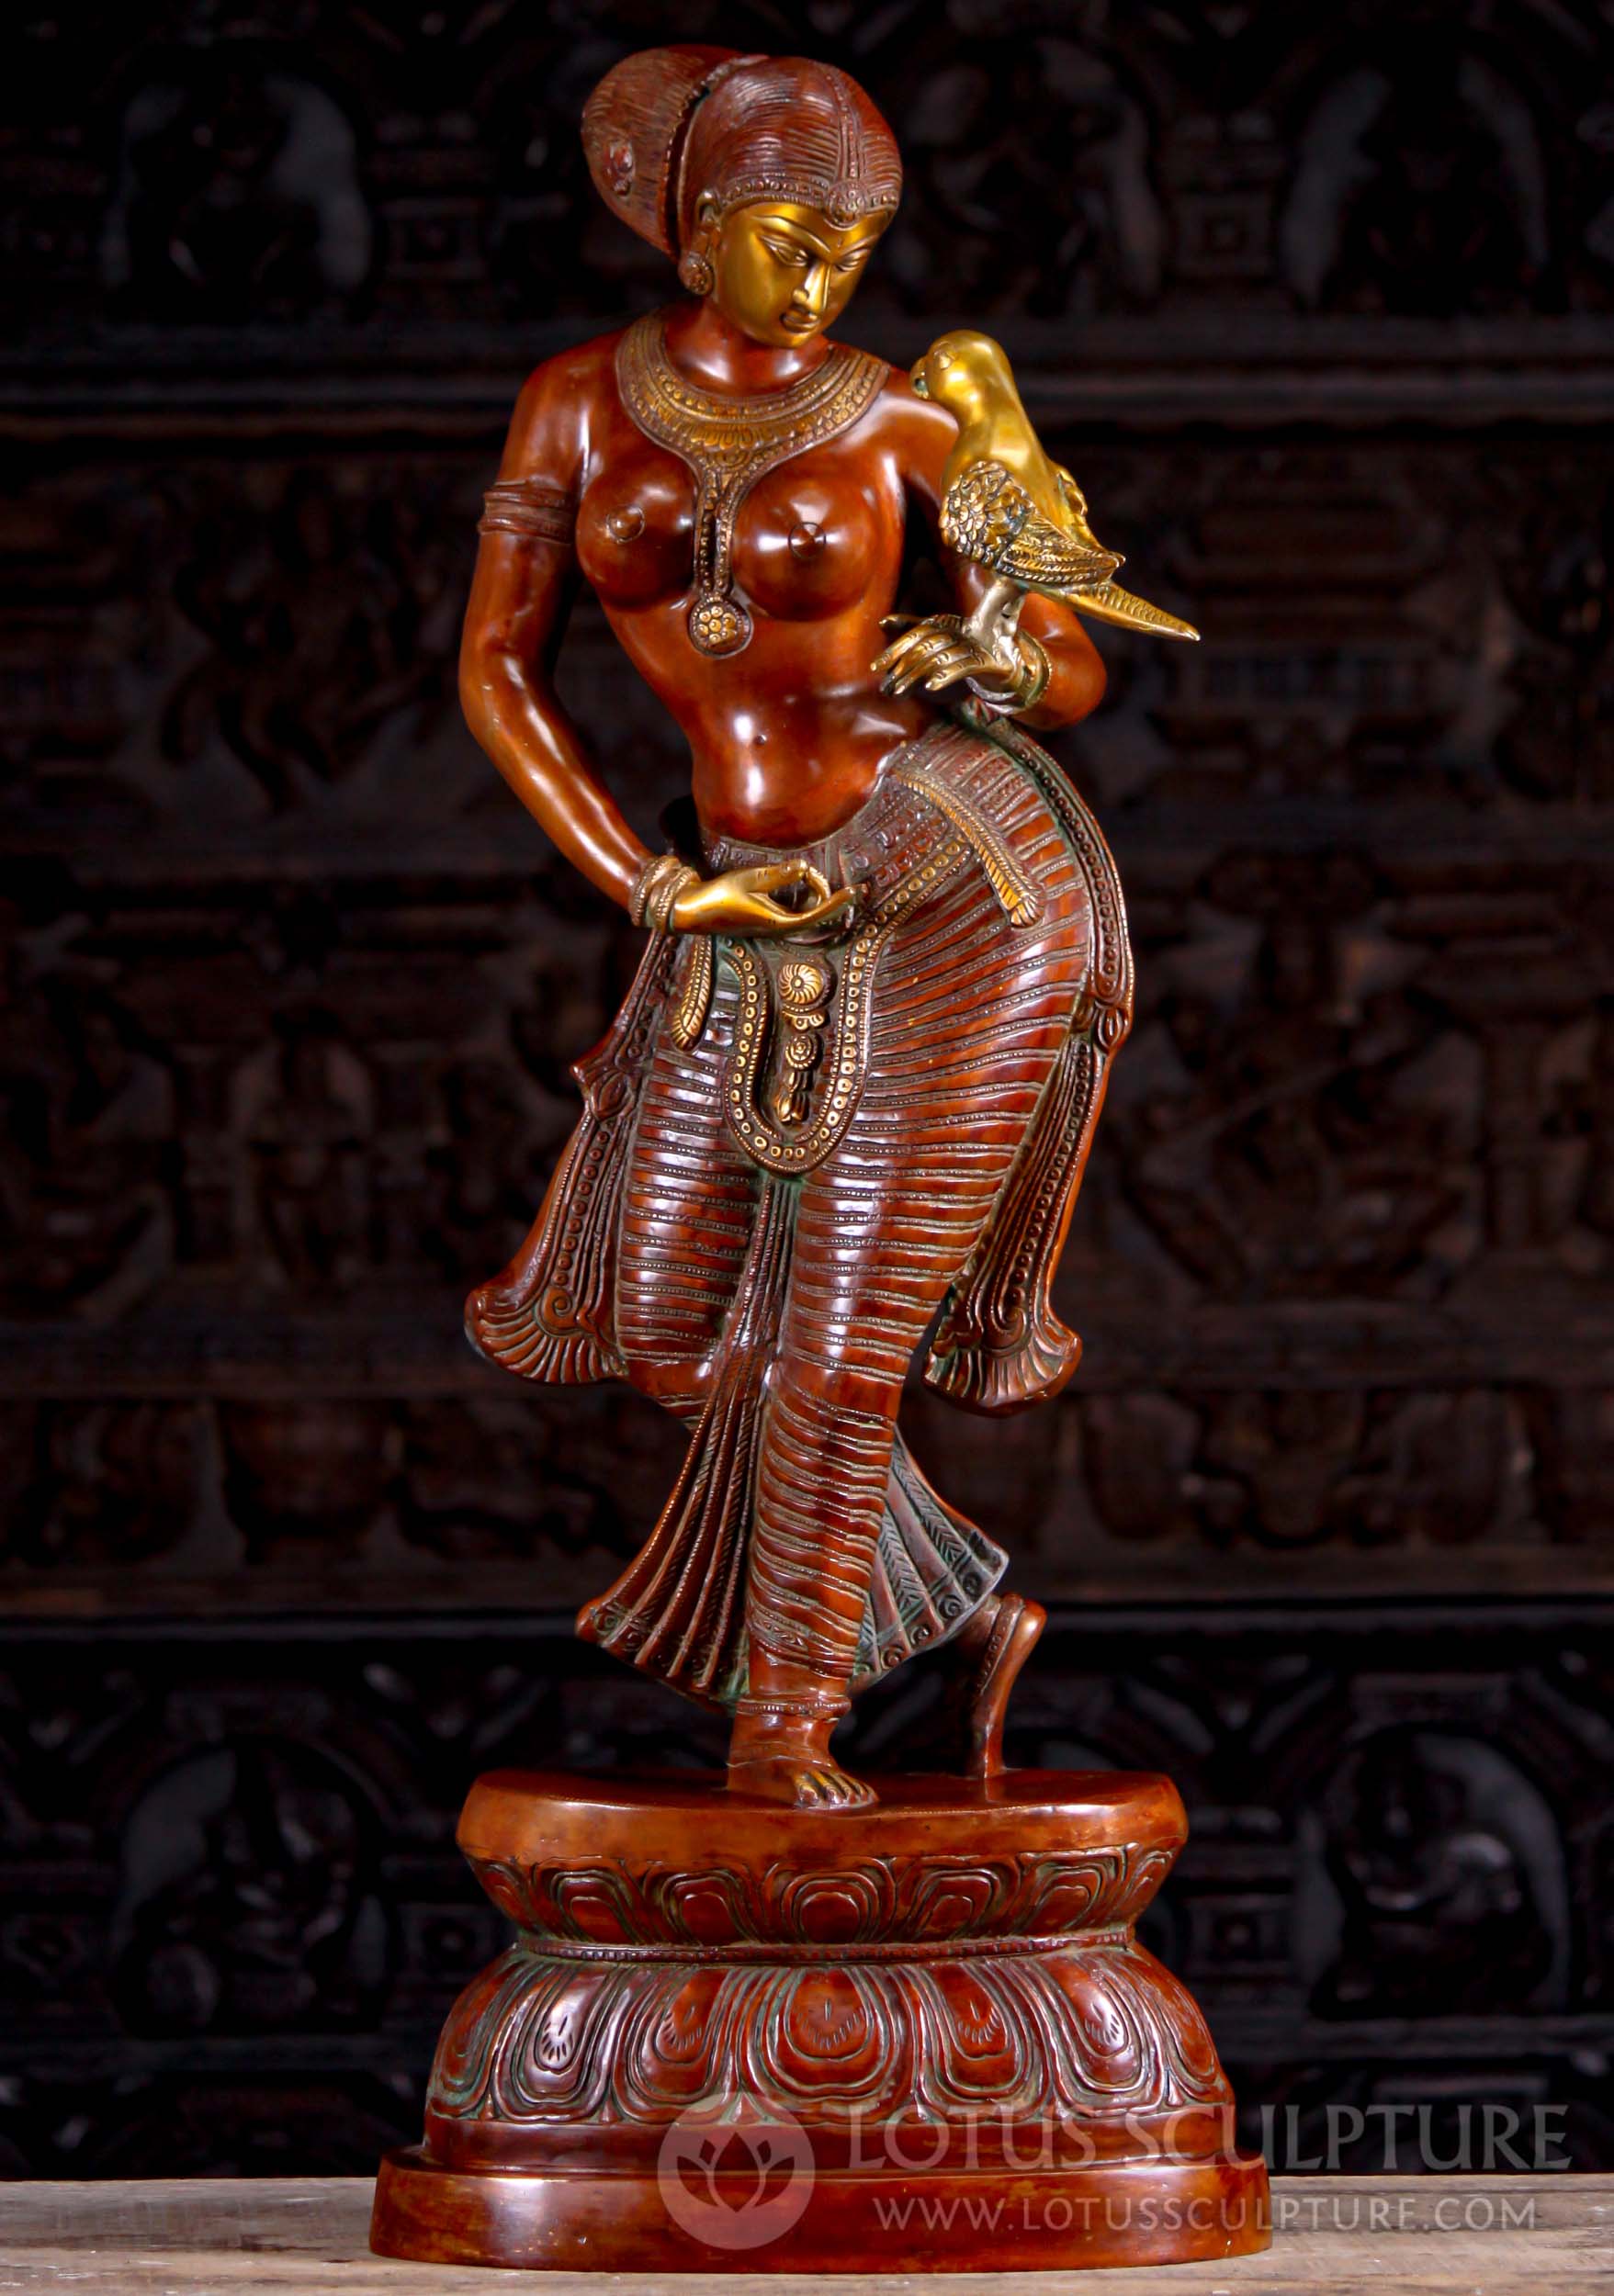 Antique brass sculpture of an Indian lady holding a parrot on her